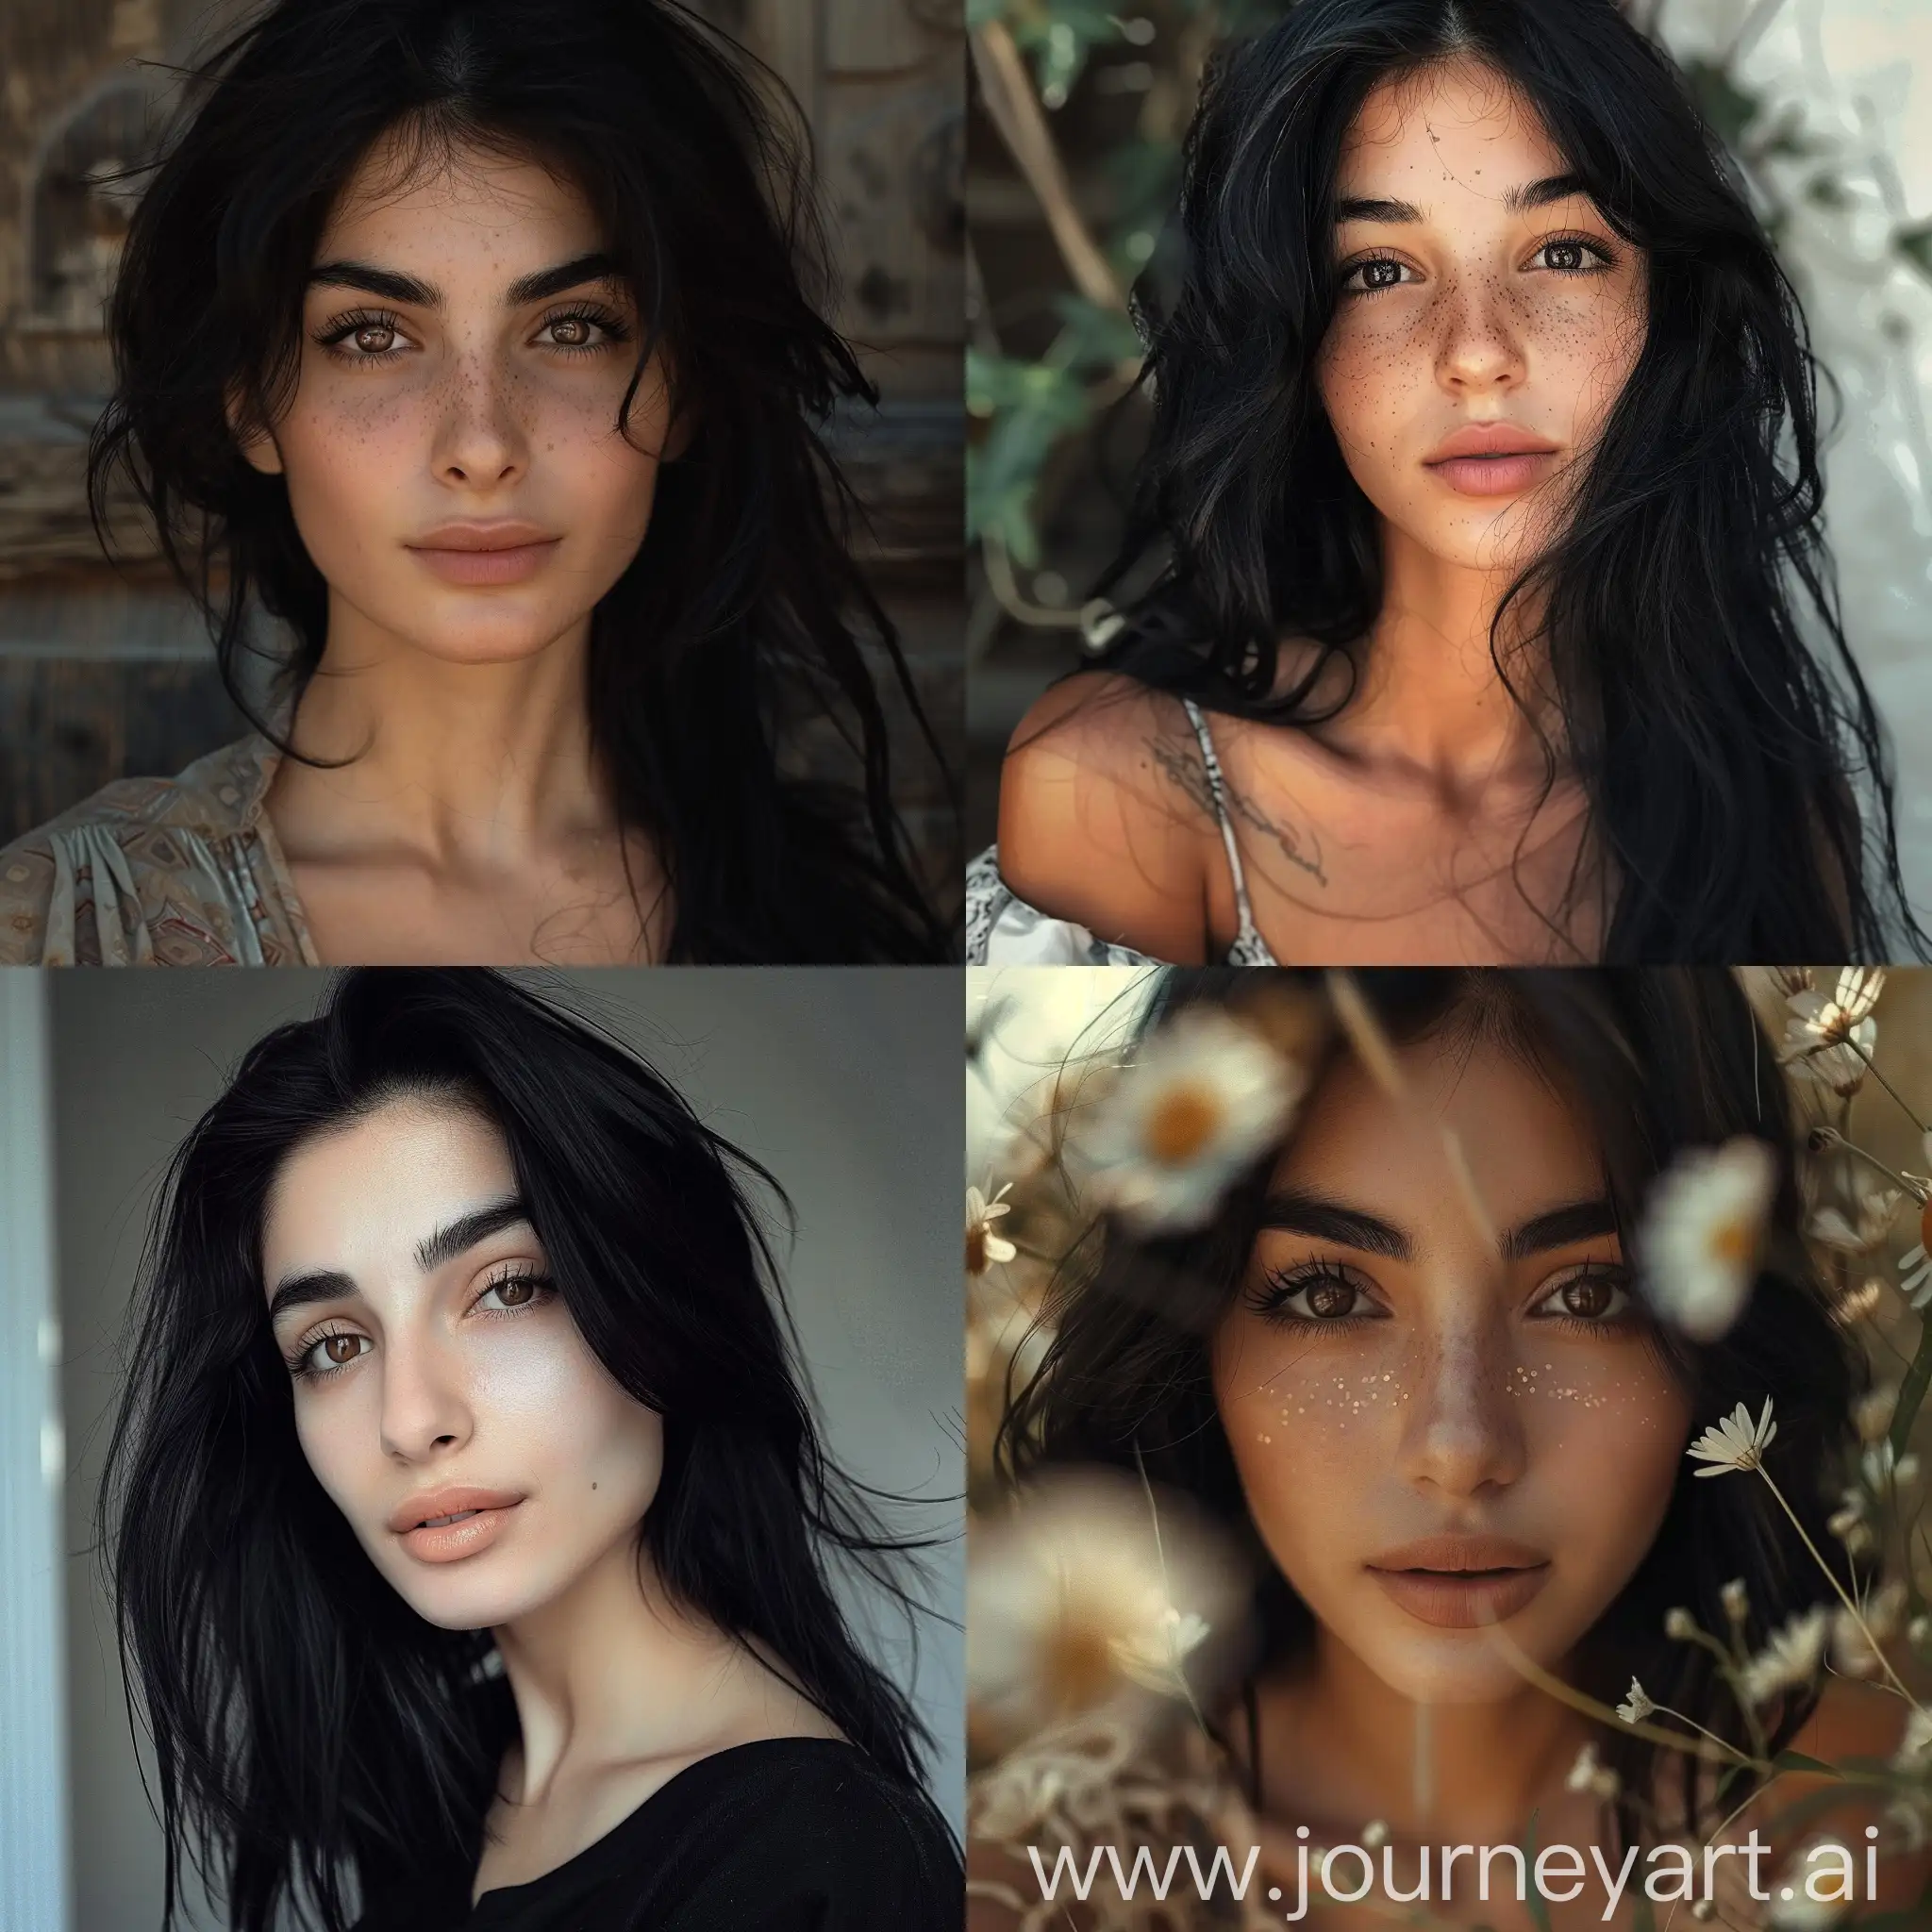 Armenian-Girls-with-Tanned-Skin-and-Dark-Hair-Ethnic-Beauty-Portrait